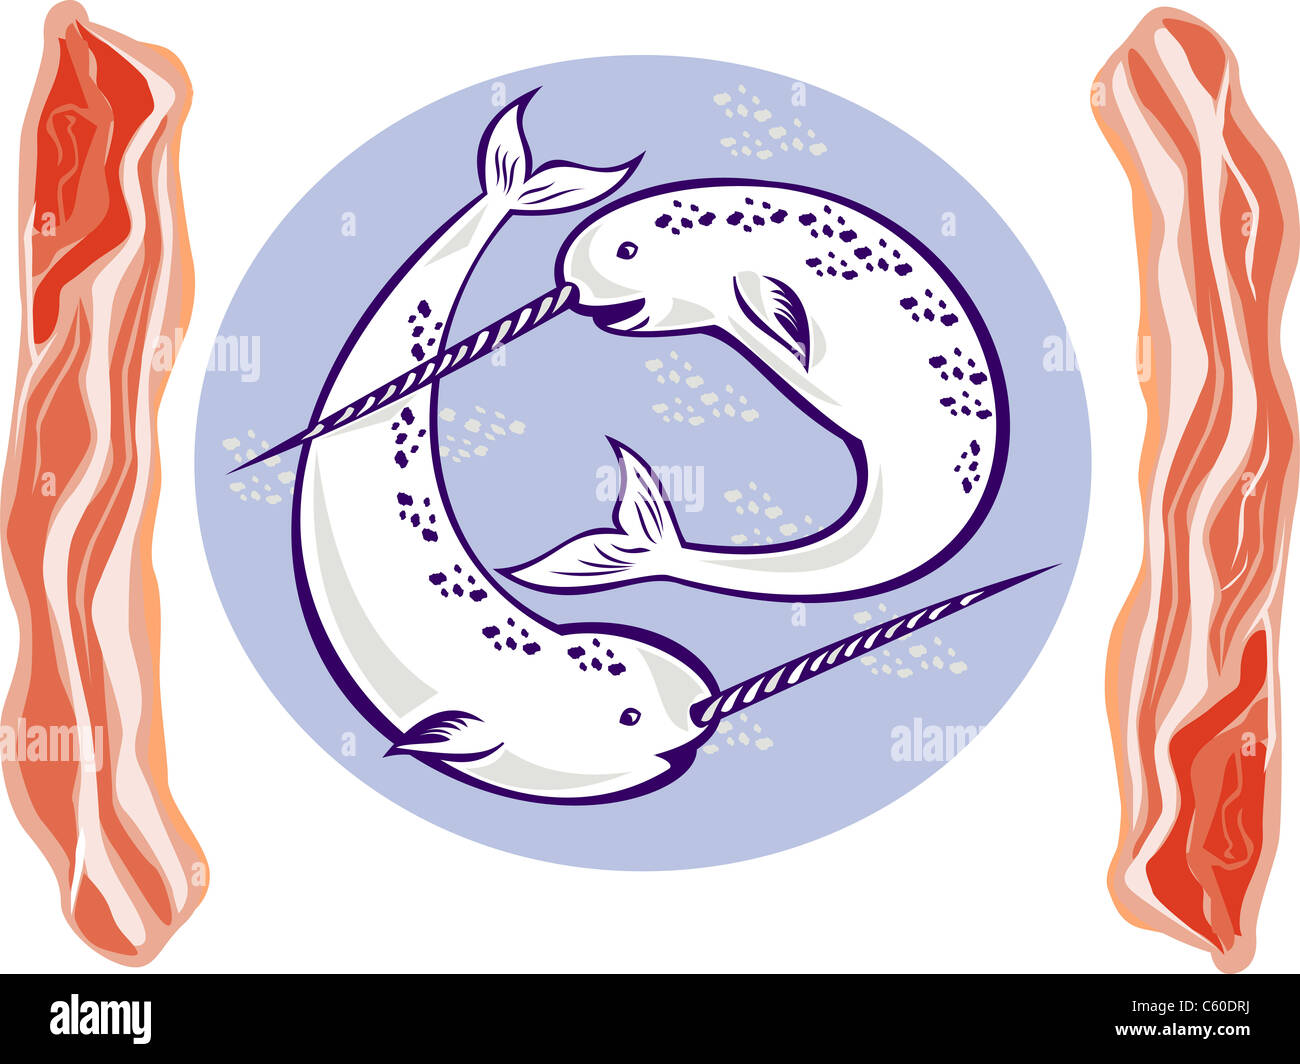 illustration of two narwhal Monodon monoceros unicorn whale with tusk horns set inside oval done with bacon on side Stock Photo